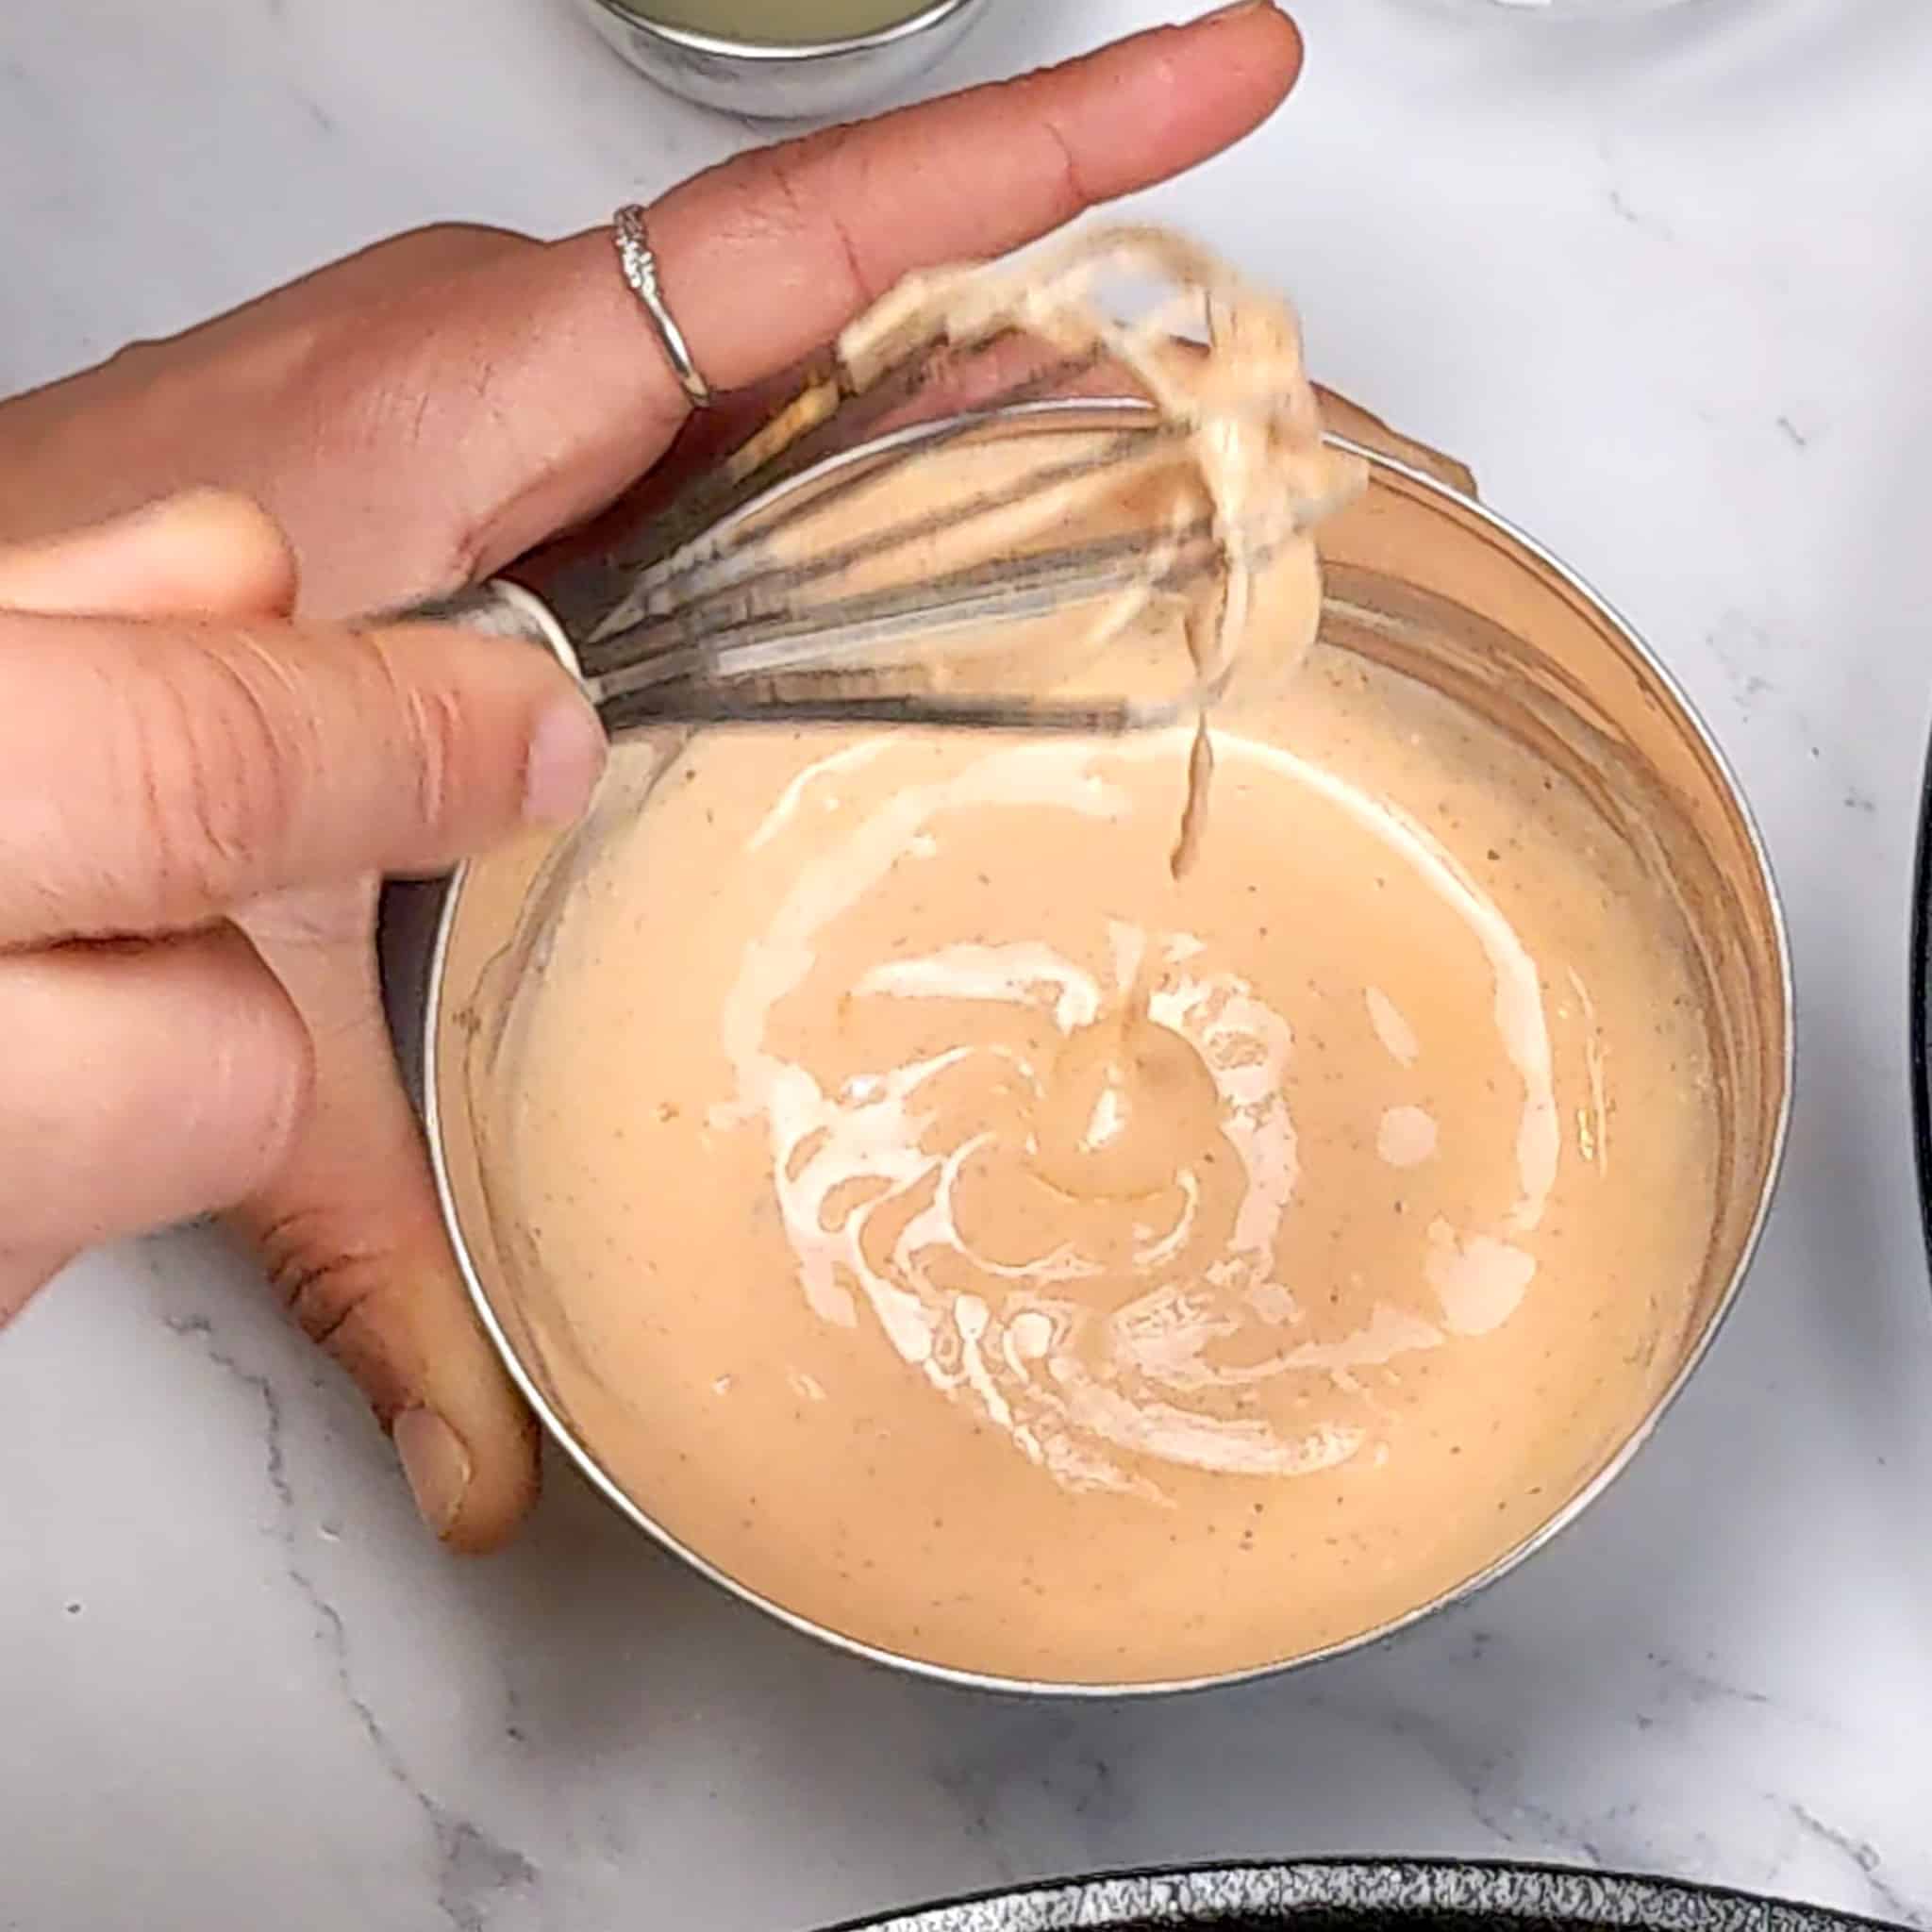 a whisk lifted up from the creamy Cholula sour cream sauce in a small stainless steel bowl.